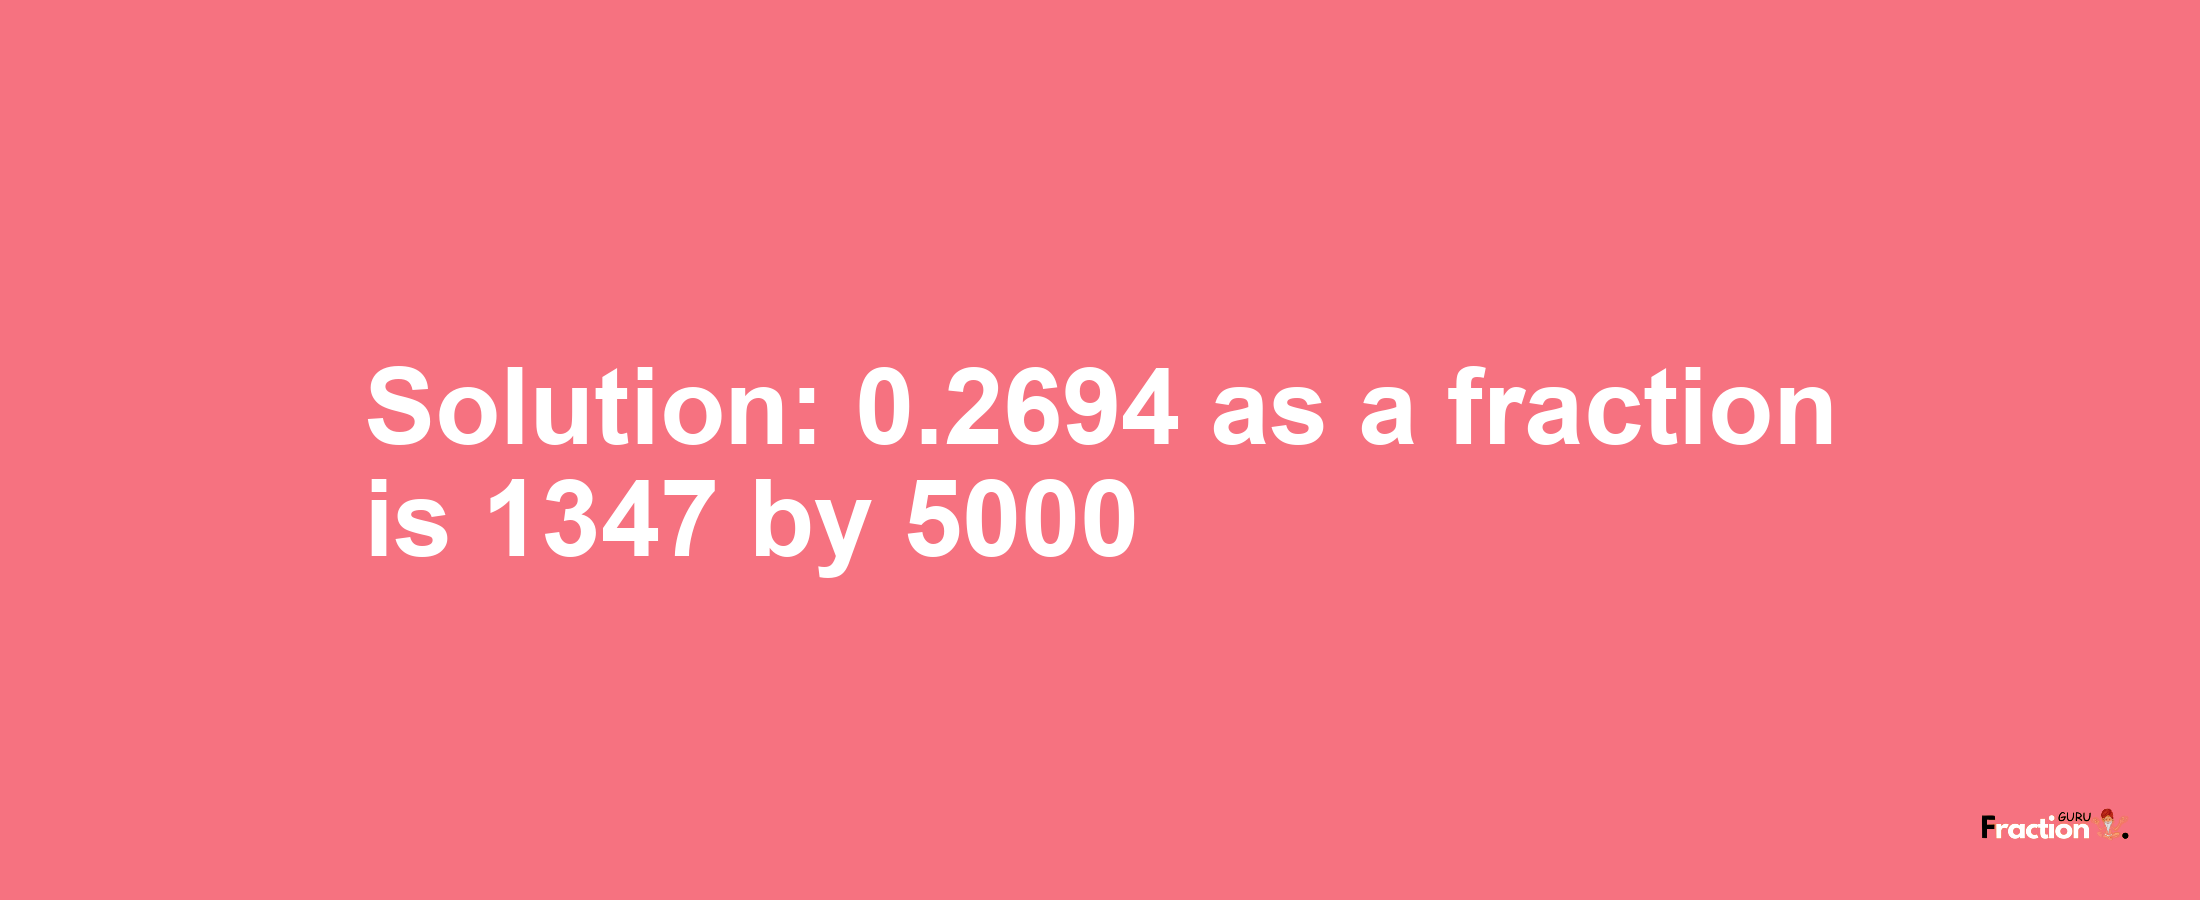 Solution:0.2694 as a fraction is 1347/5000